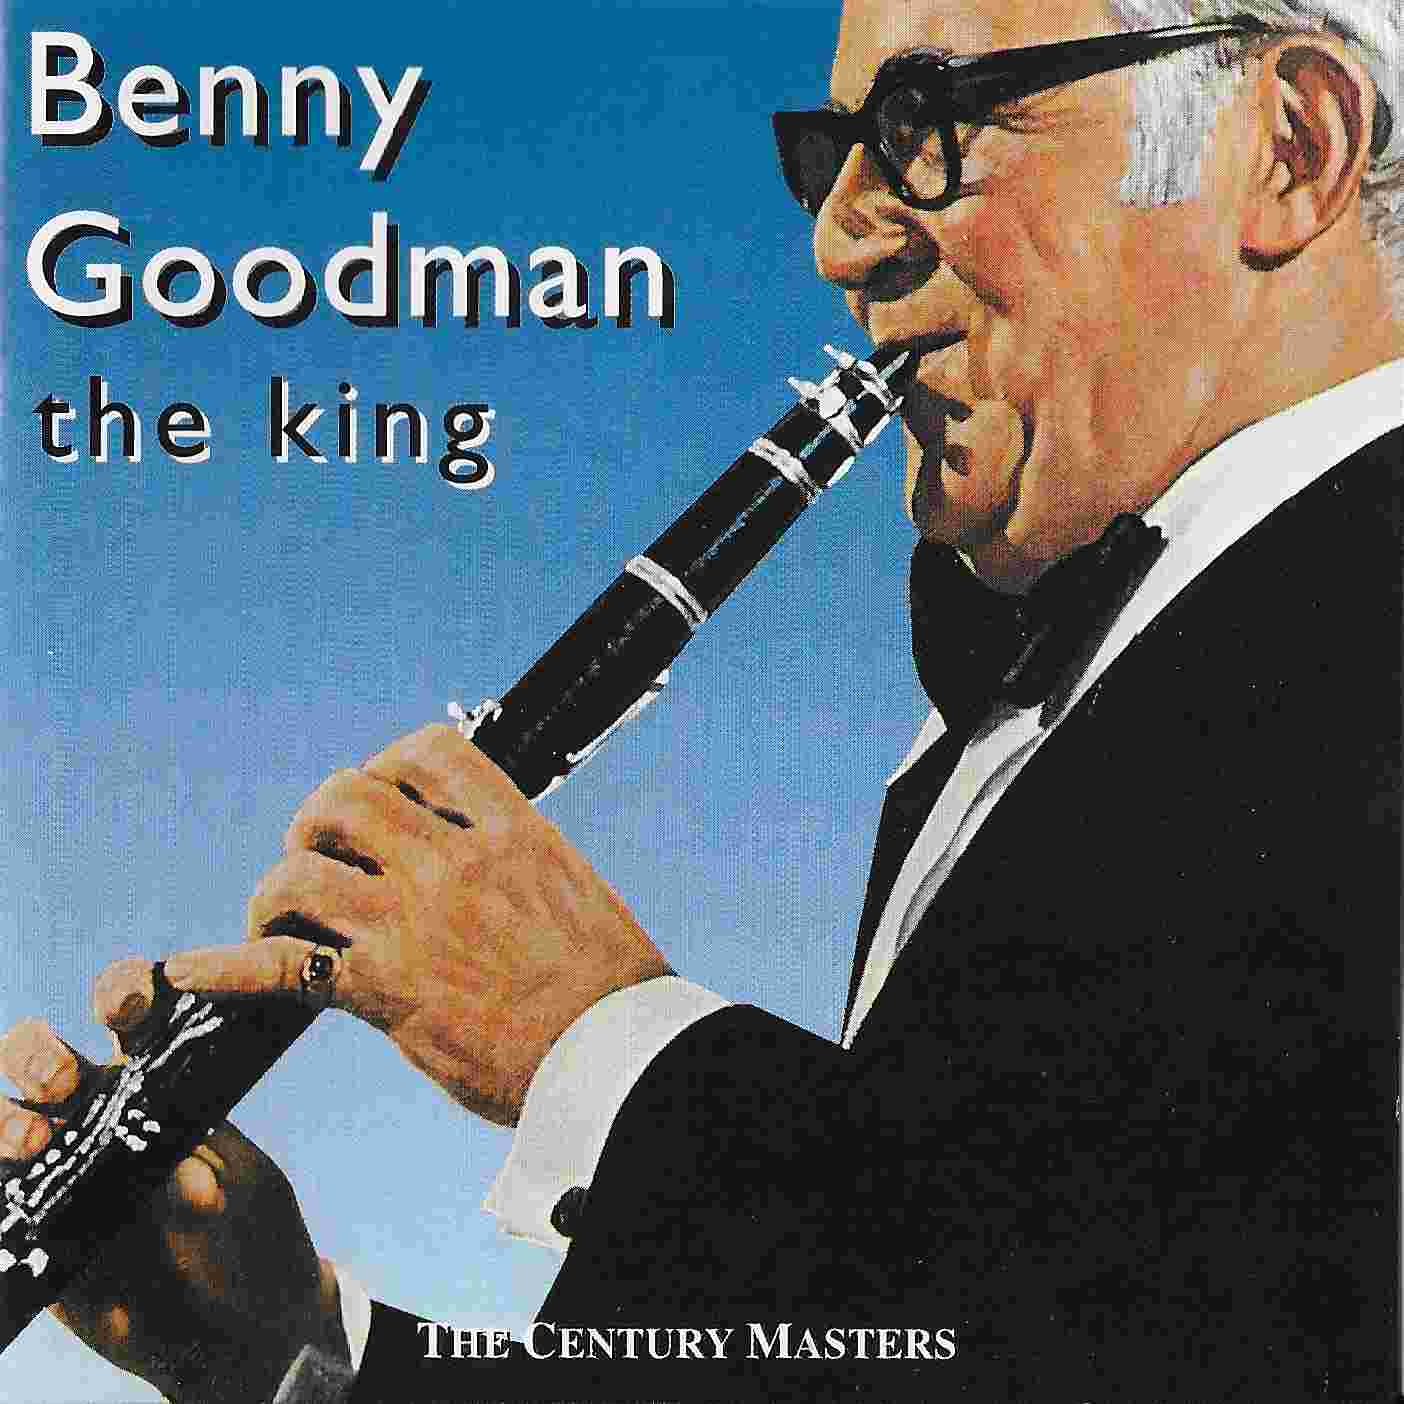 Picture of CJCD 835 The Century Catalogue - The king - Benny Goodman by artist Benny Goodman from the BBC cds - Records and Tapes library